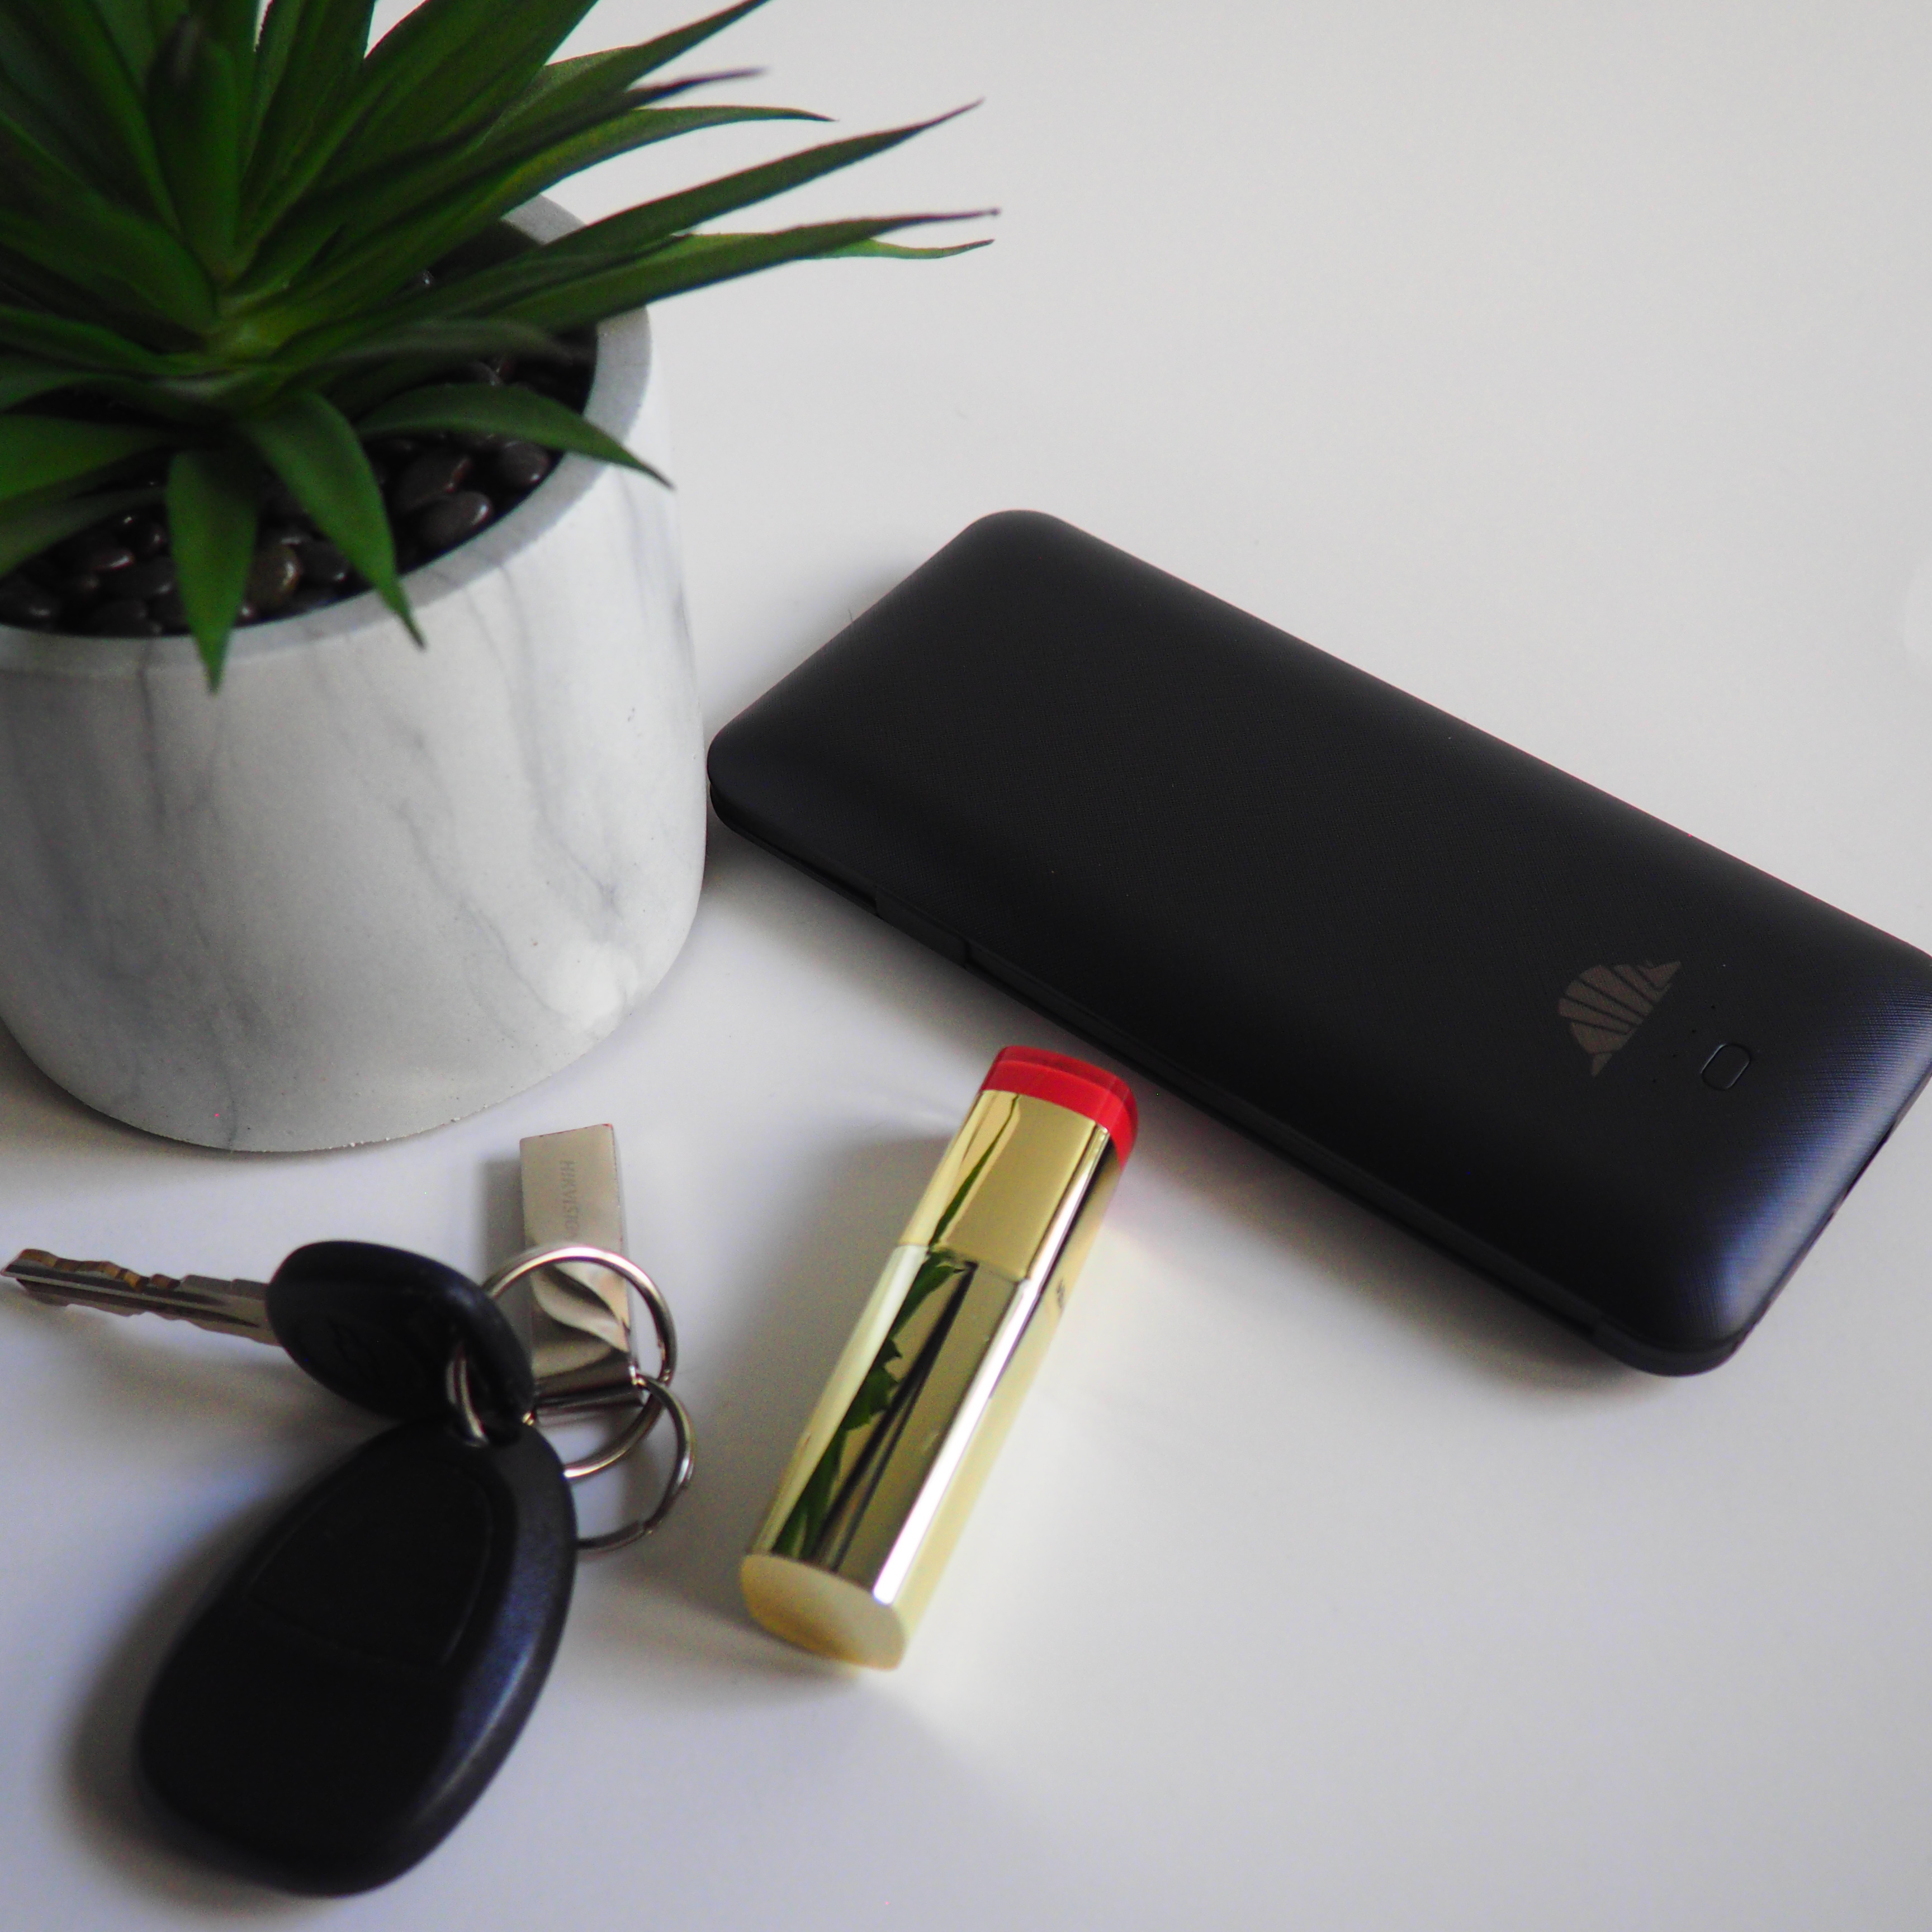 Scout - World's Most Versatile Portable Charger